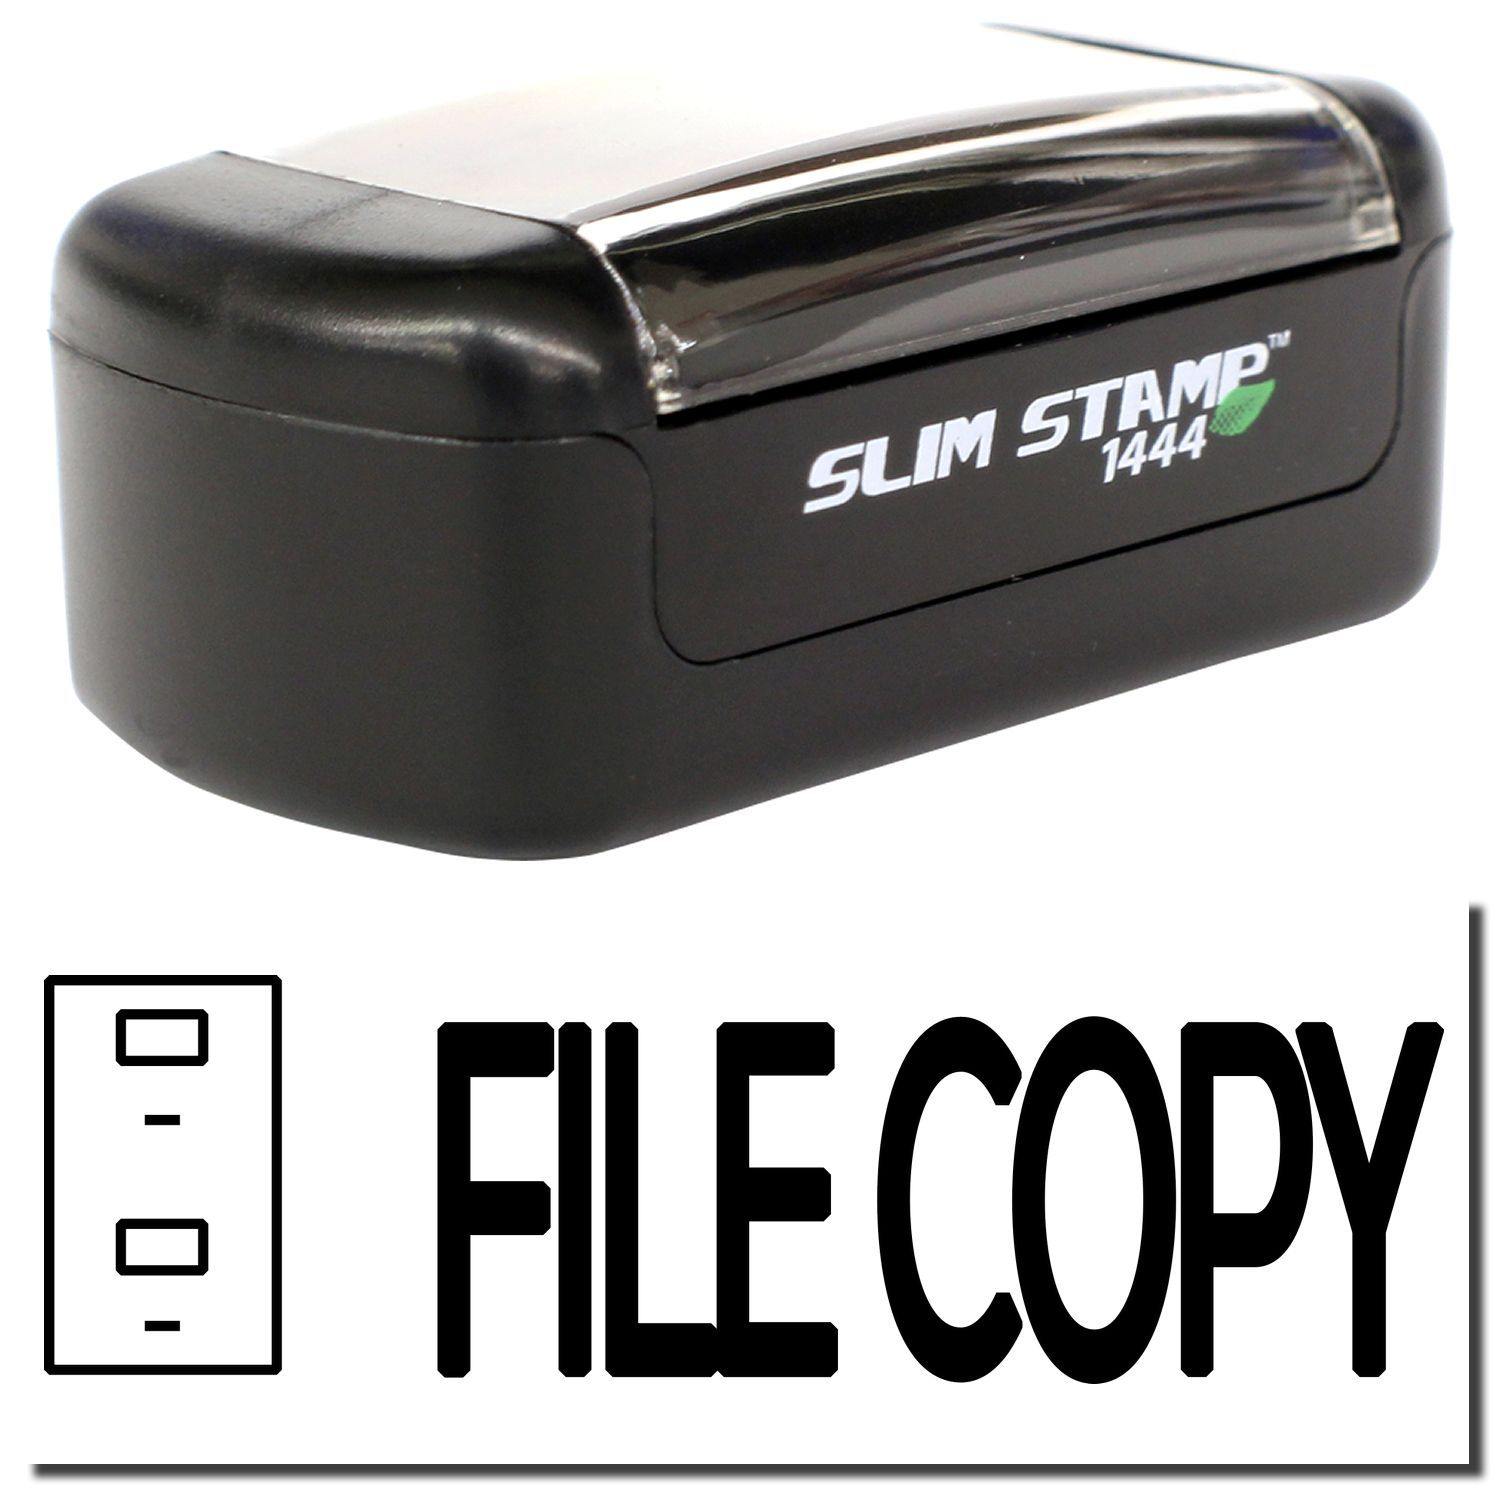 A stock office pre-inked stamp with a stamped image showing how the text "FILE COPY" with an icon of a drawer on the left side is displayed after stamping.